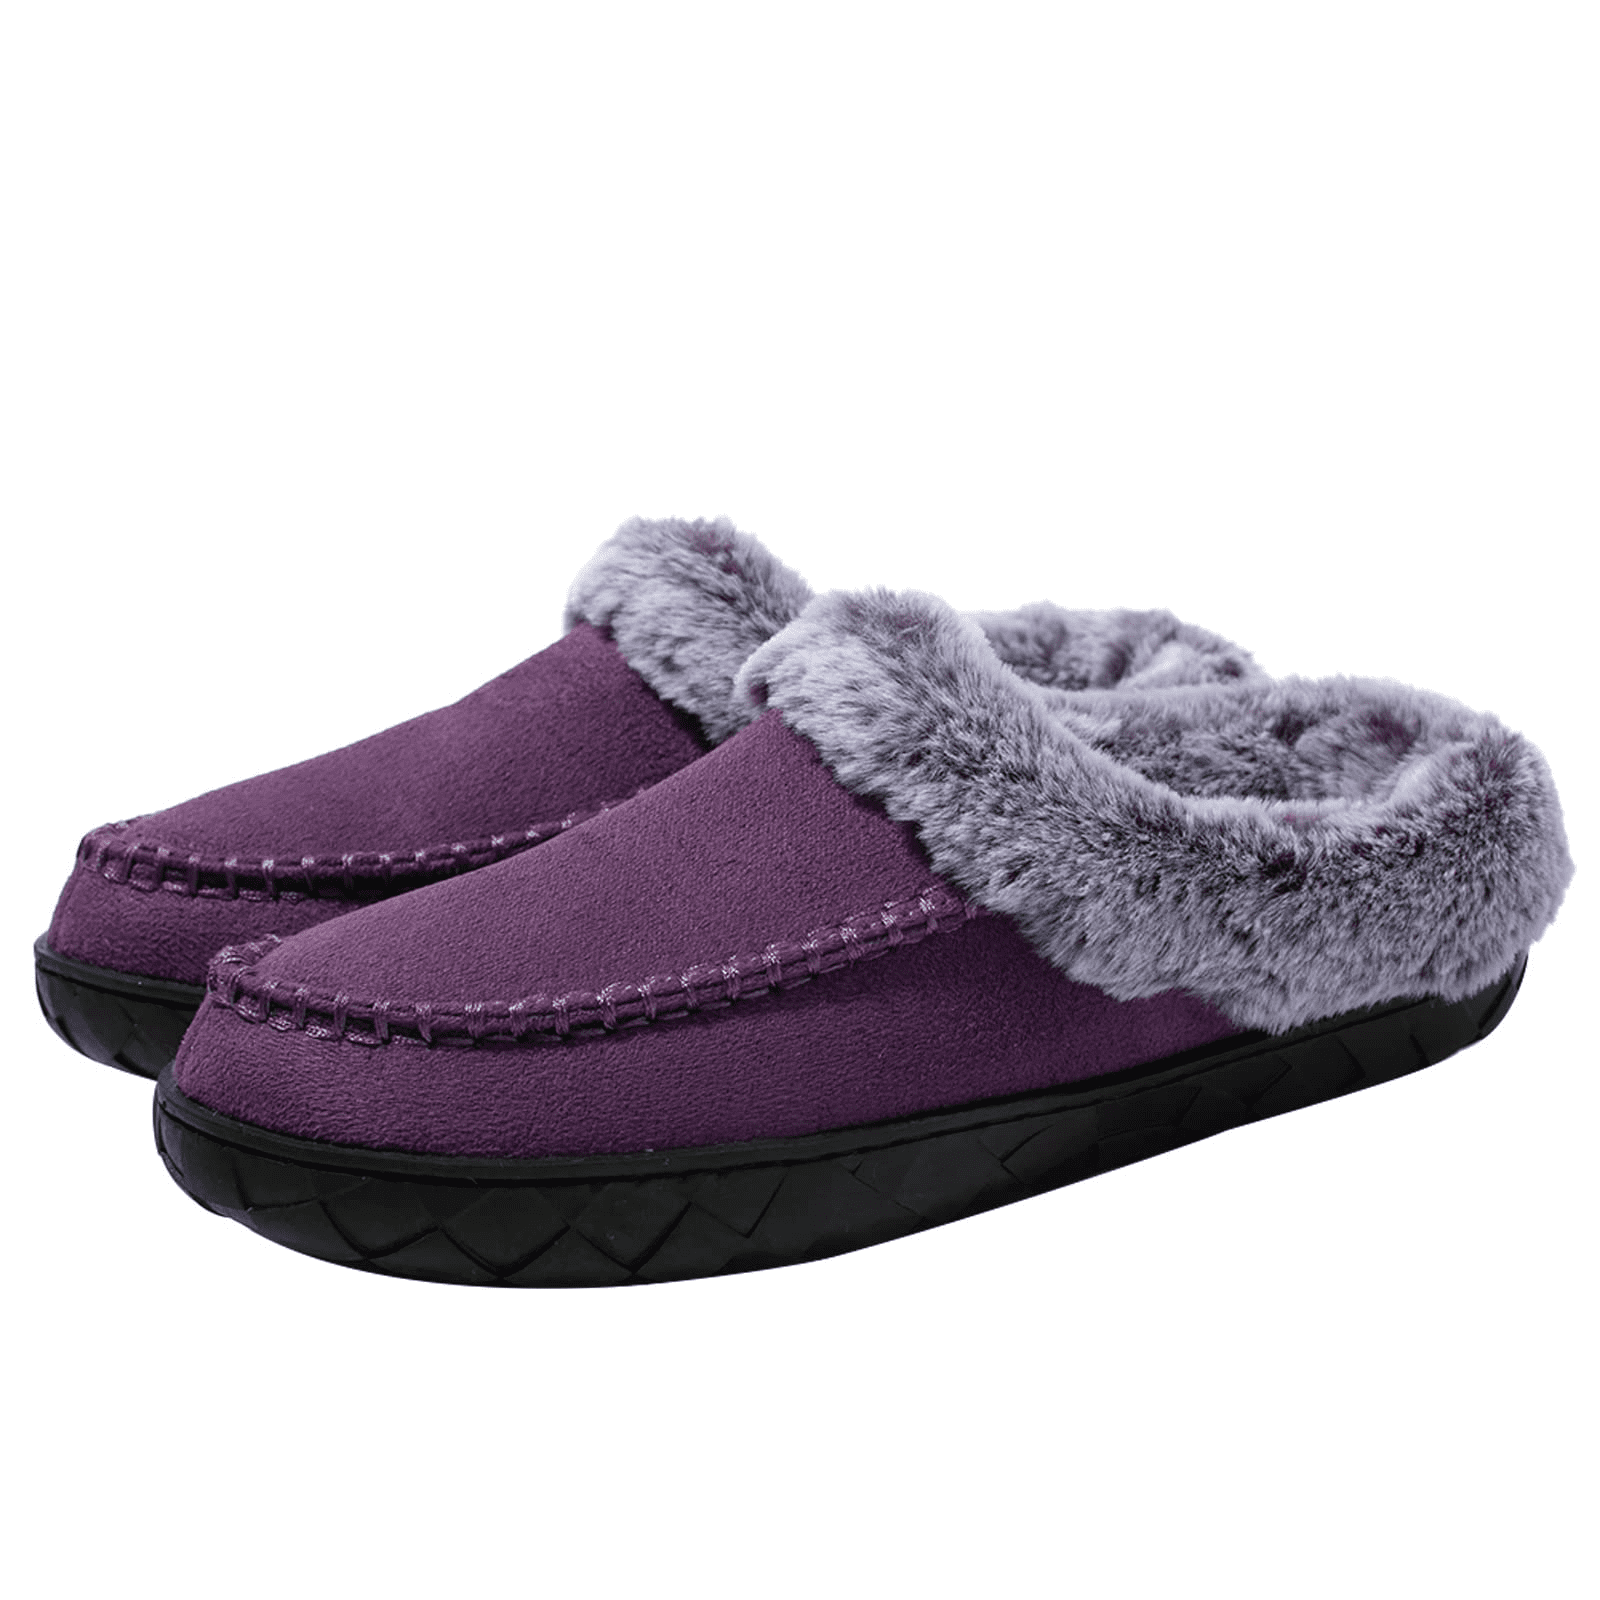 Womens Memory Foam House Slippers Fluffy Moccasins Faux Fur Lining ...